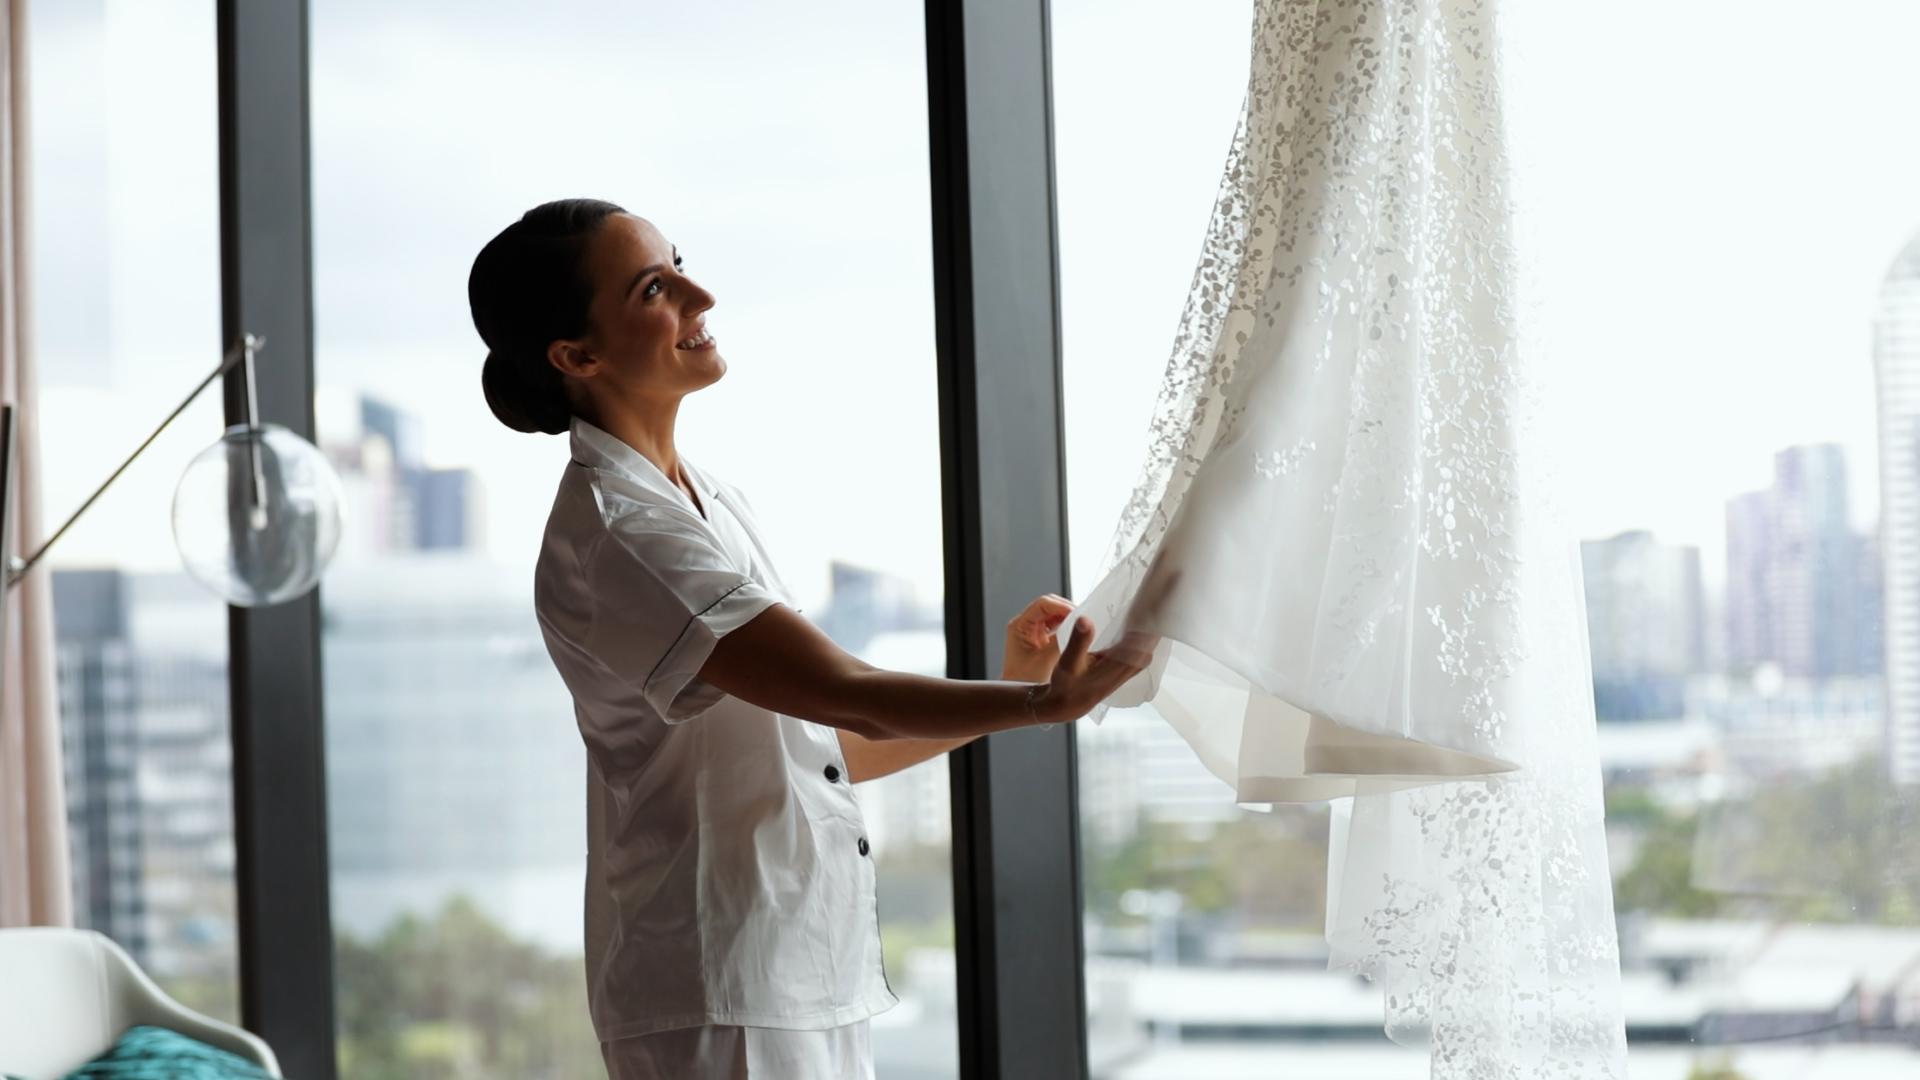 bride smiles while touching her wedding dress hanging up near window in hotel room